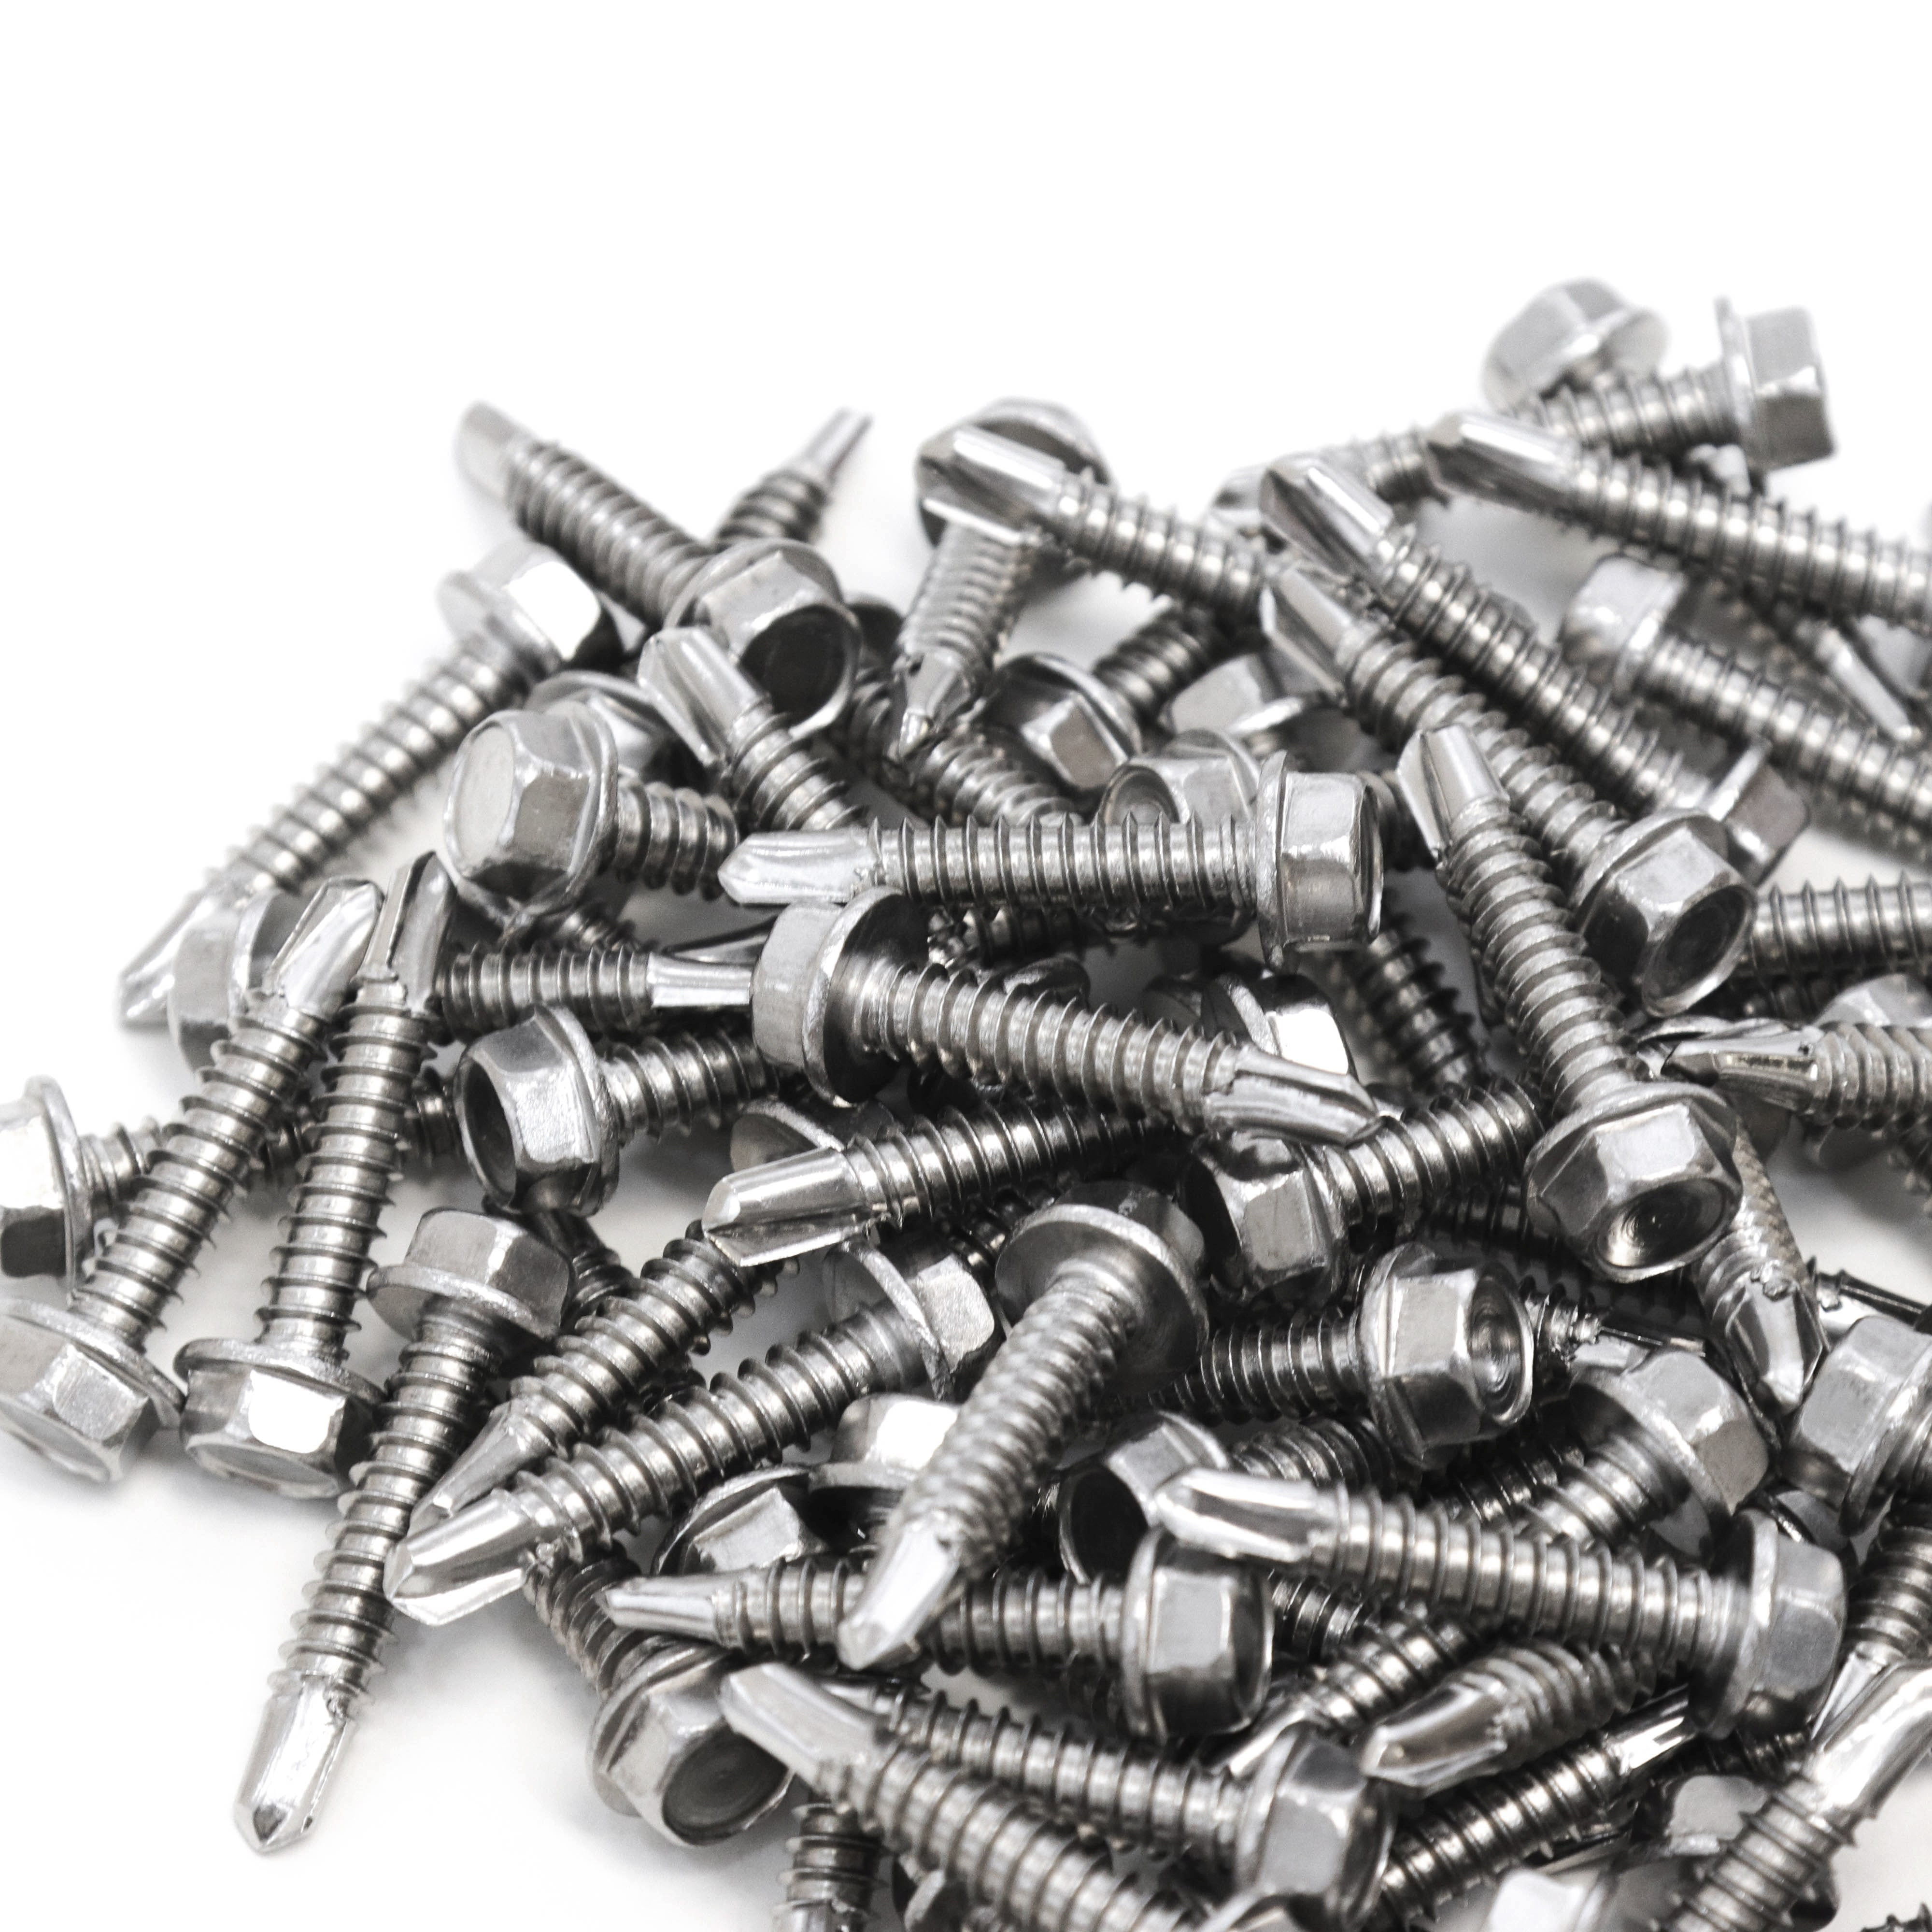 40 Pan Head Self Tapping Screw Set 304 SS Stainless Steel #8 x 1.25" 